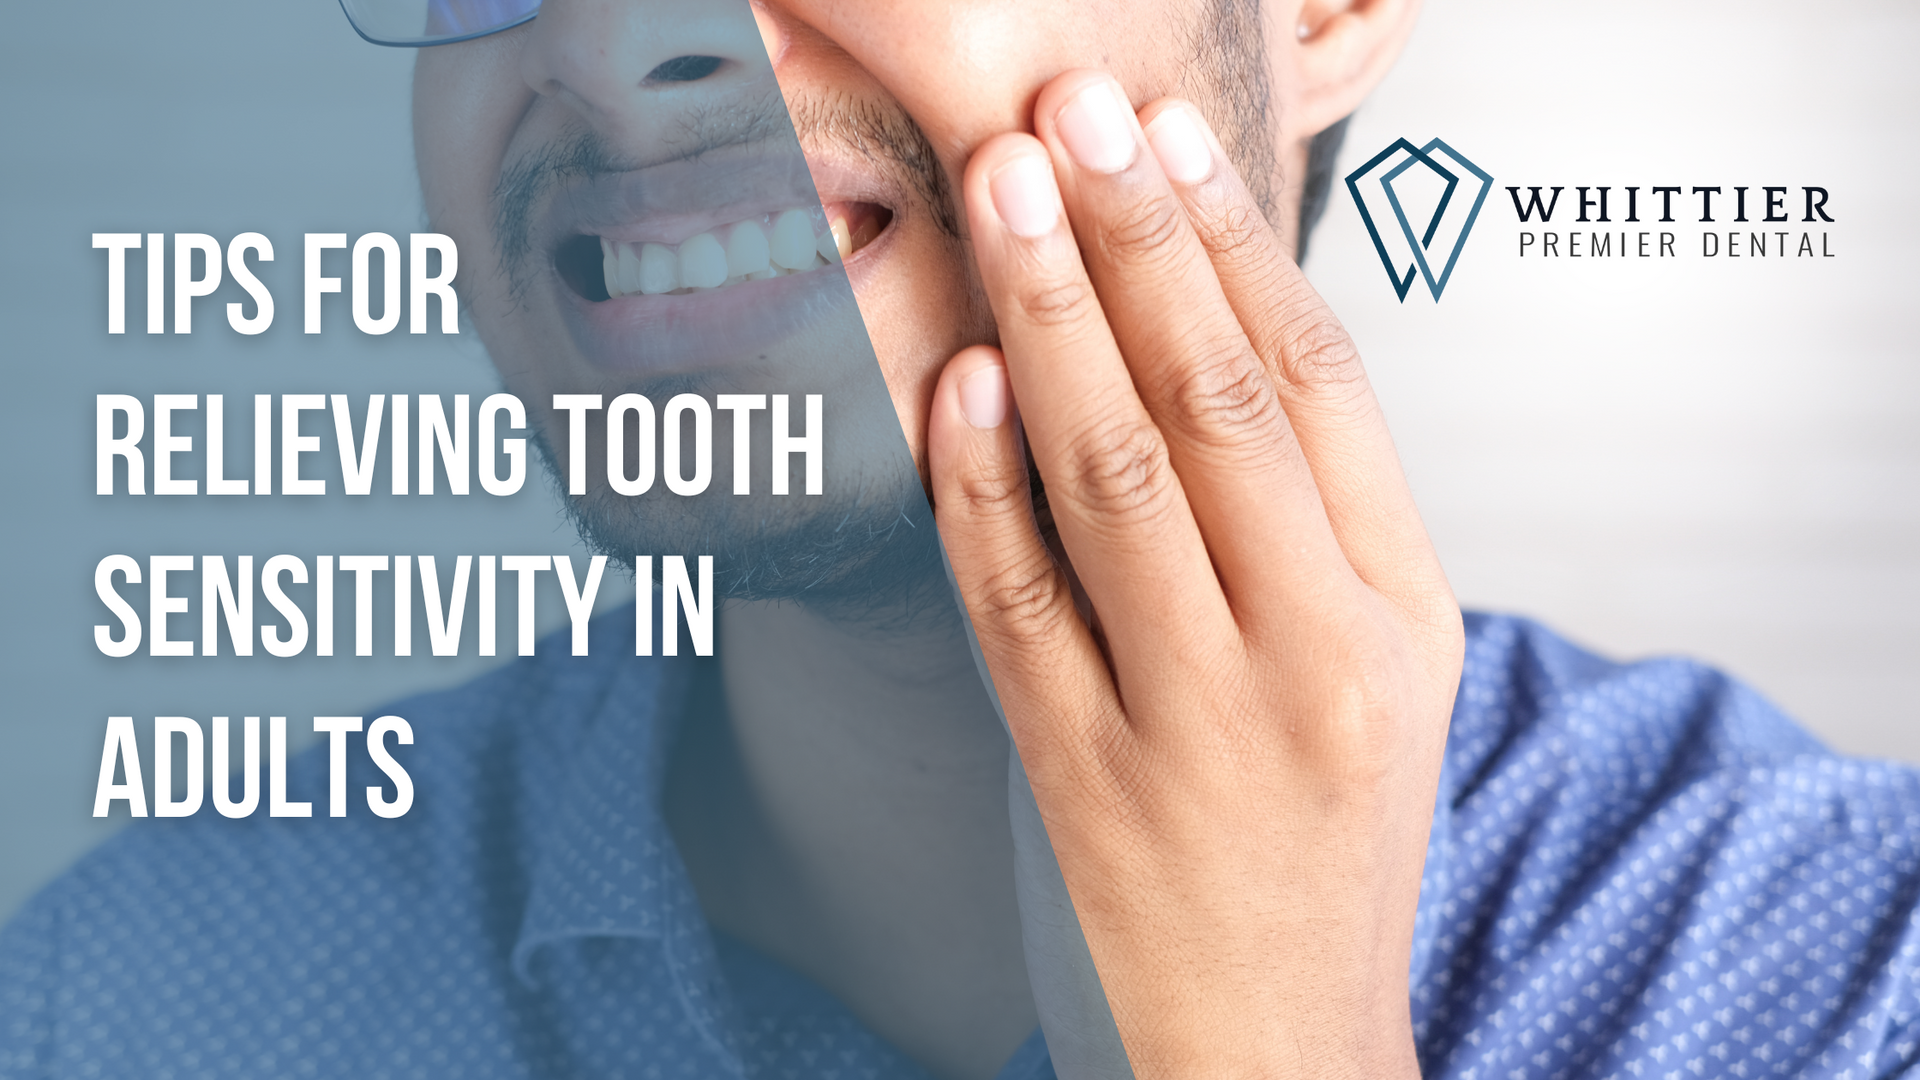 A man is covering his mouth with his hand because he has a tooth sensitivity in adults.